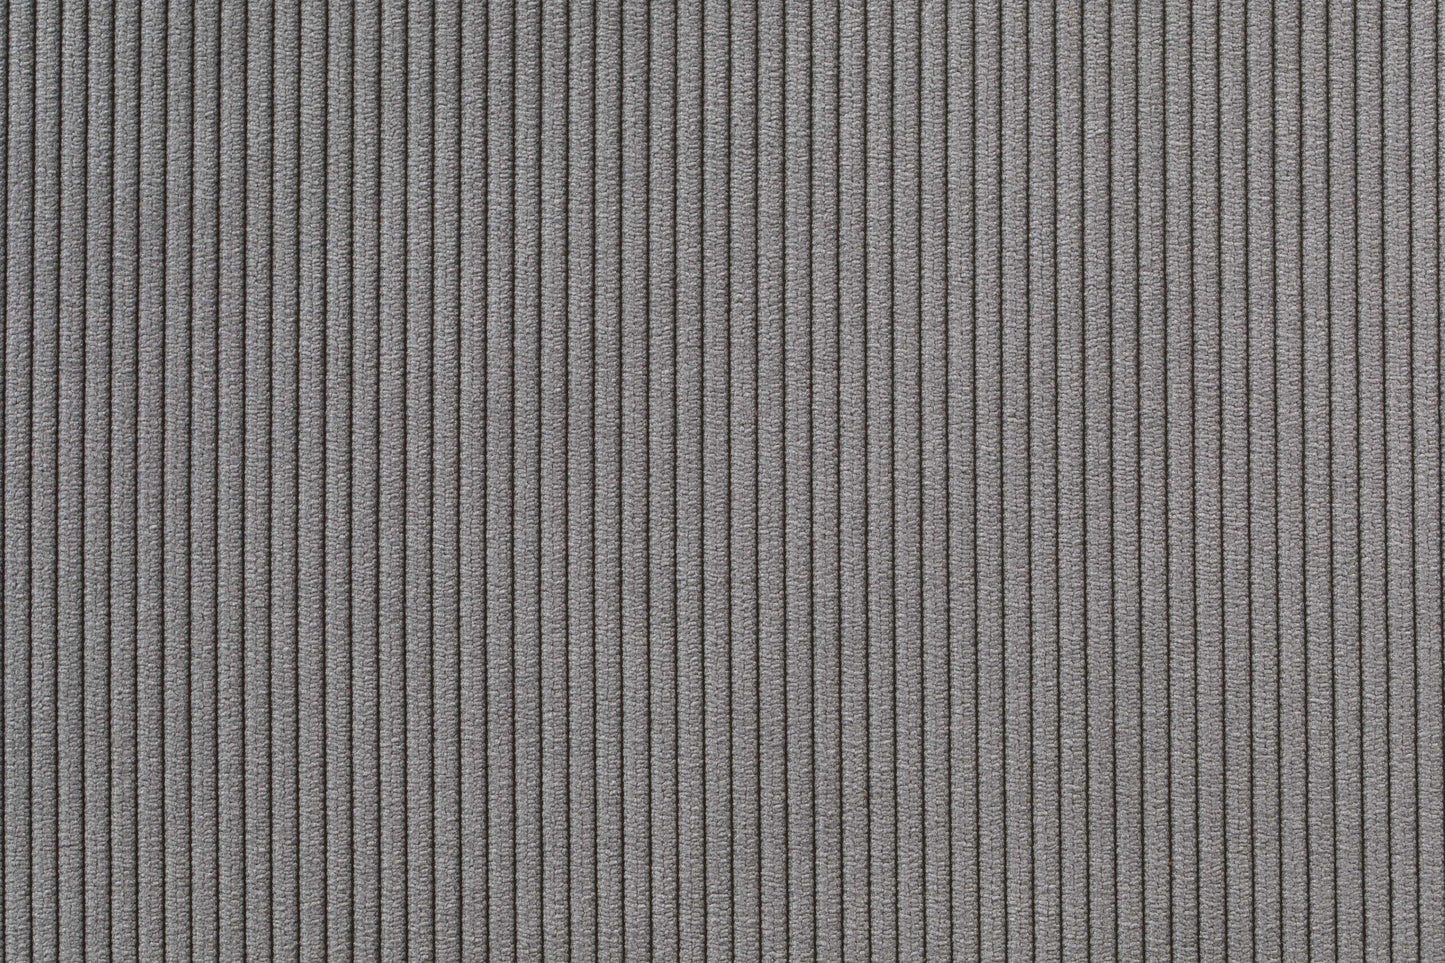 Zuiver | CHAIR RIDGE BRUSHED RIB COOL GREY 32A Default Title